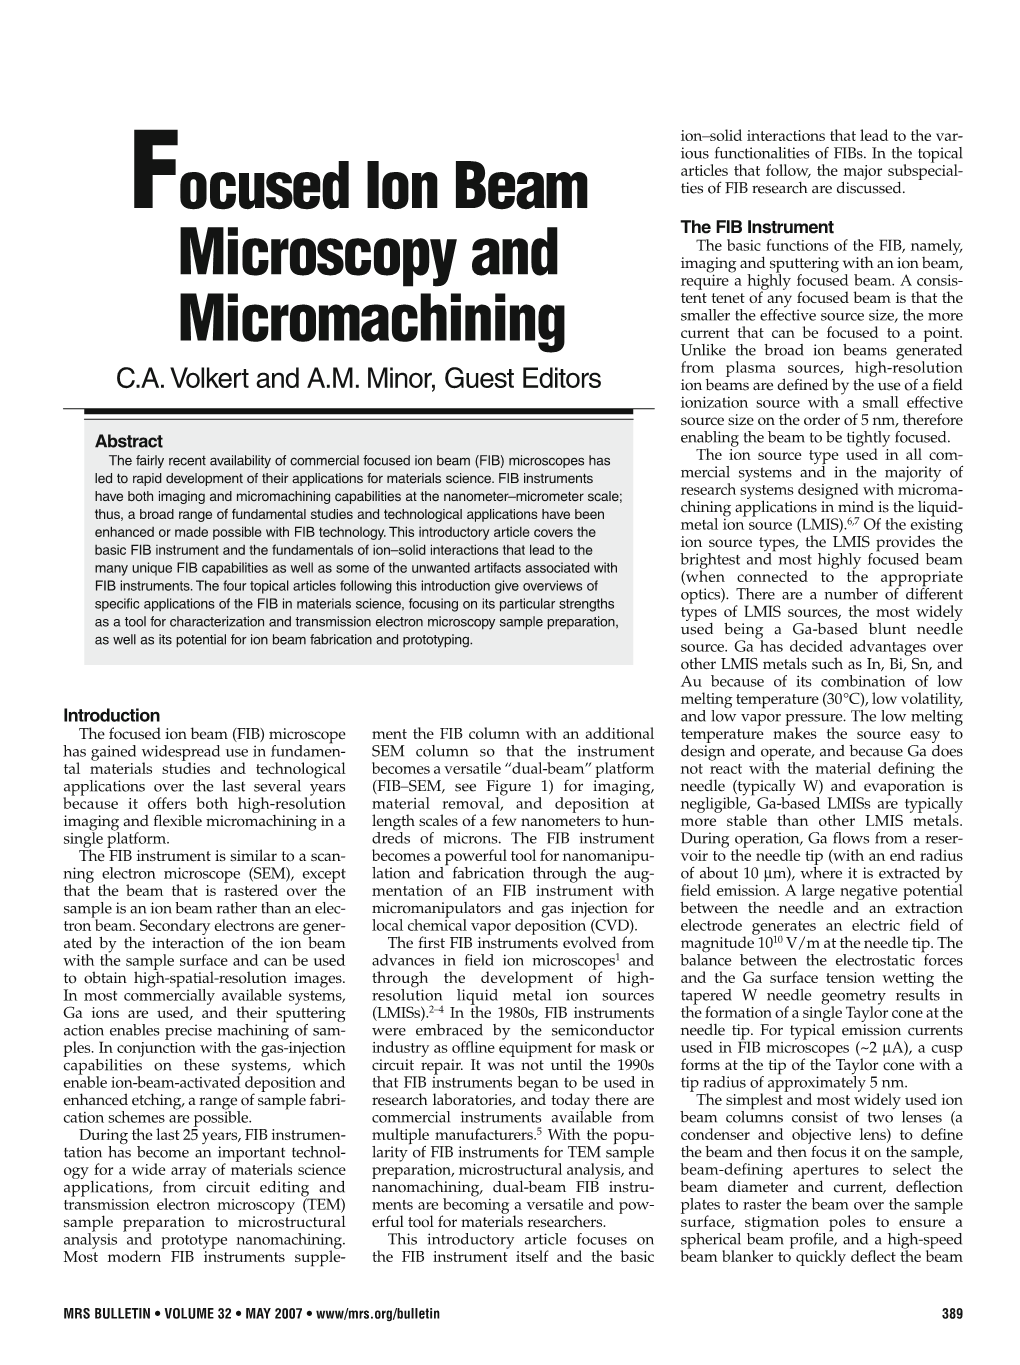 Focused Ion Beam Microscopy and Micromachining